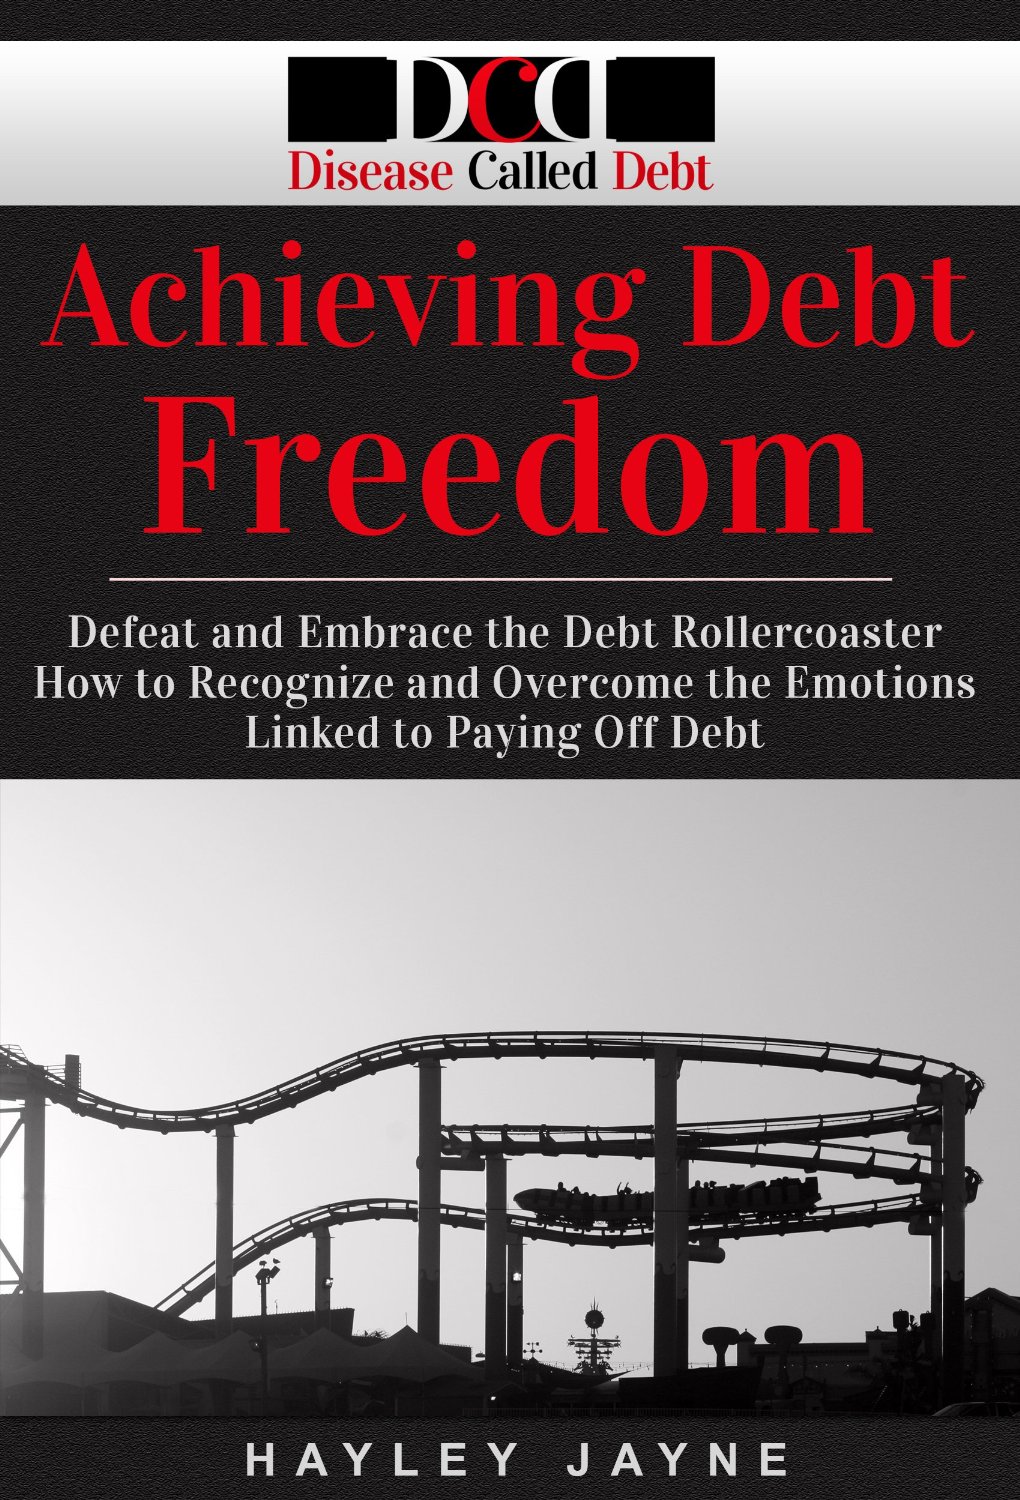 Achieving Debt Freedom: Defeat and Embrace the Debt Rollercoaster – How to Recognize and Overcome the Emotions Linked to Paying off Debt by Hayley Jayne